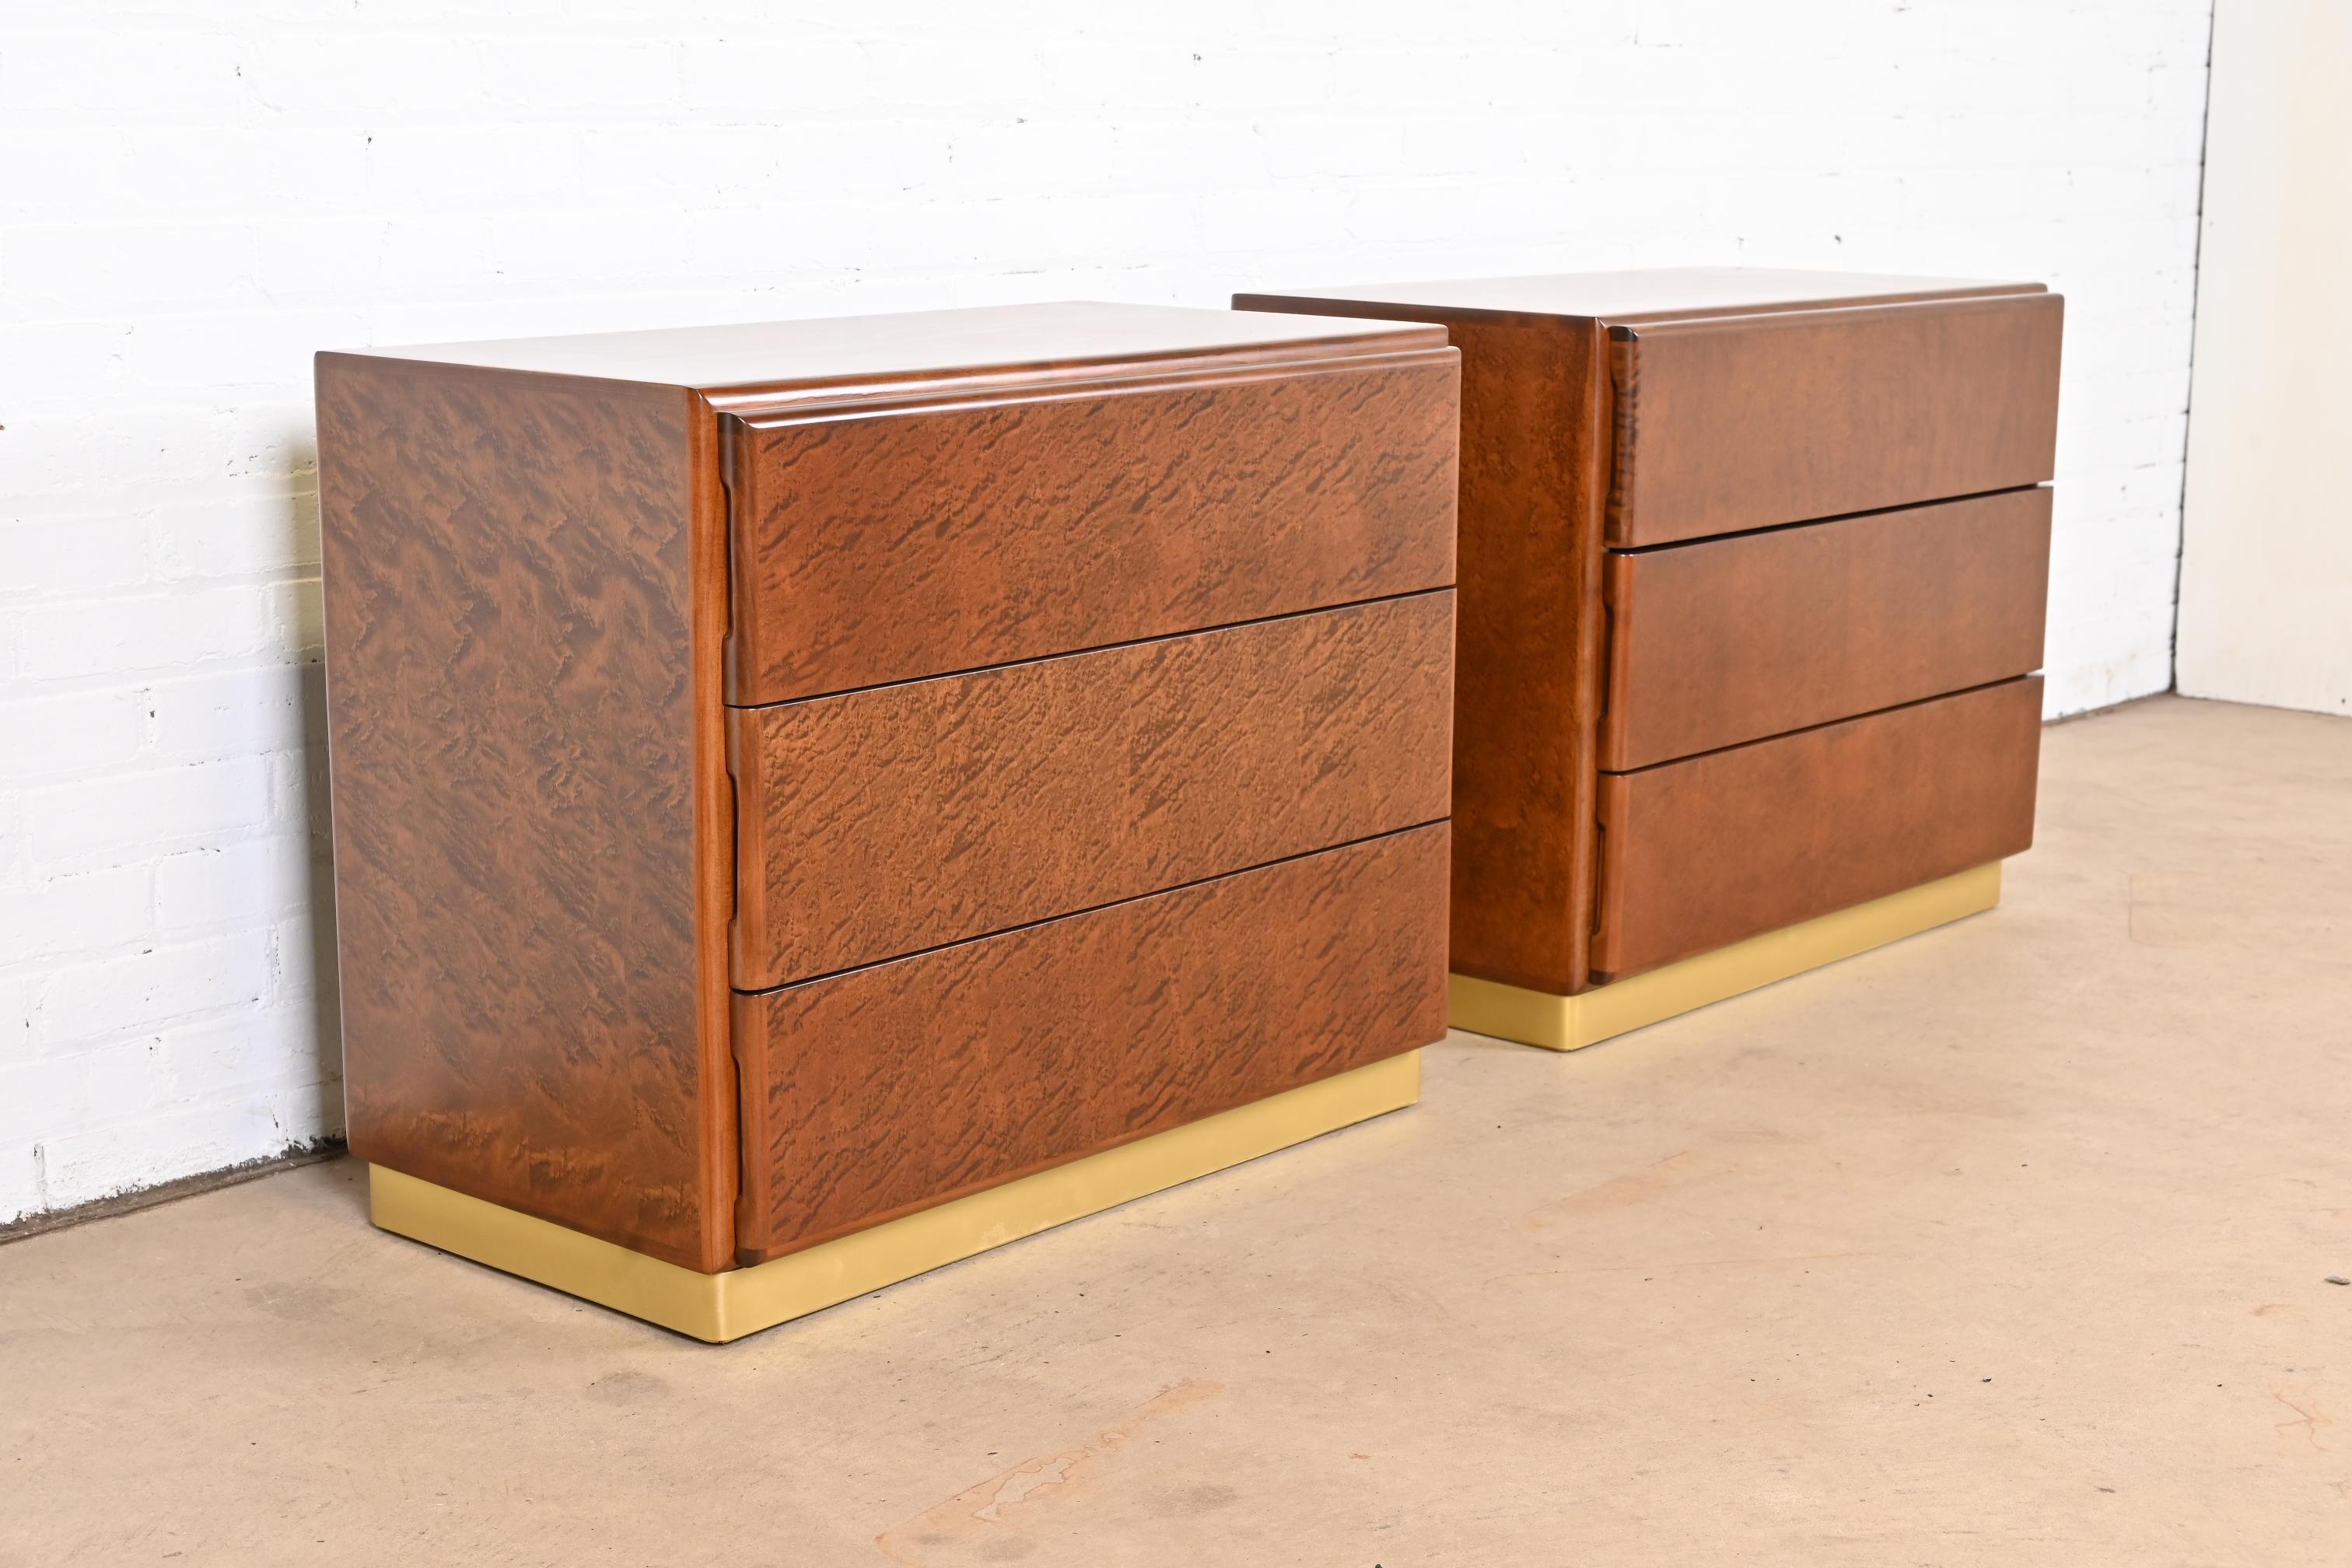 Milo Baughman for Thayer Coggin Birdseye Maple and Brass Bedside Chests, Pair In Good Condition For Sale In South Bend, IN